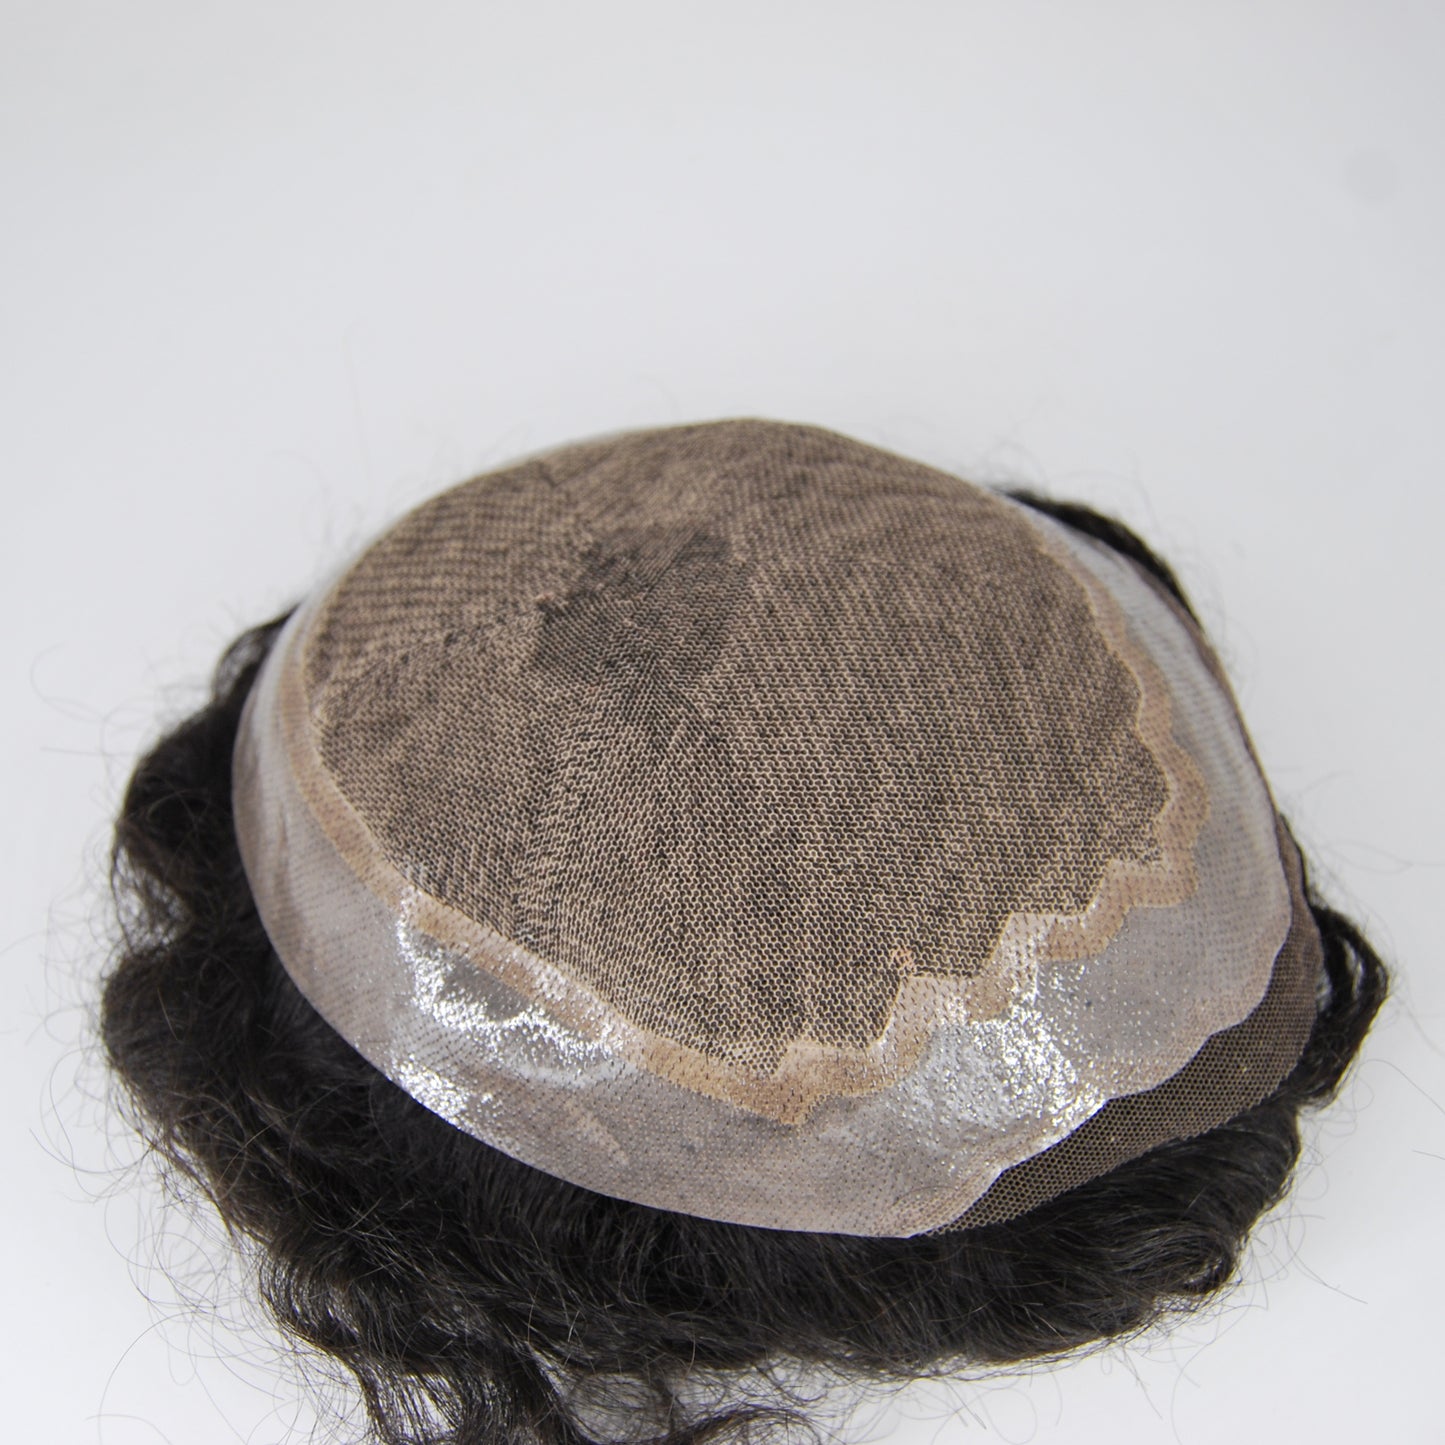 clearance silk base with PU around men's hair replacement natural black color men's toupee